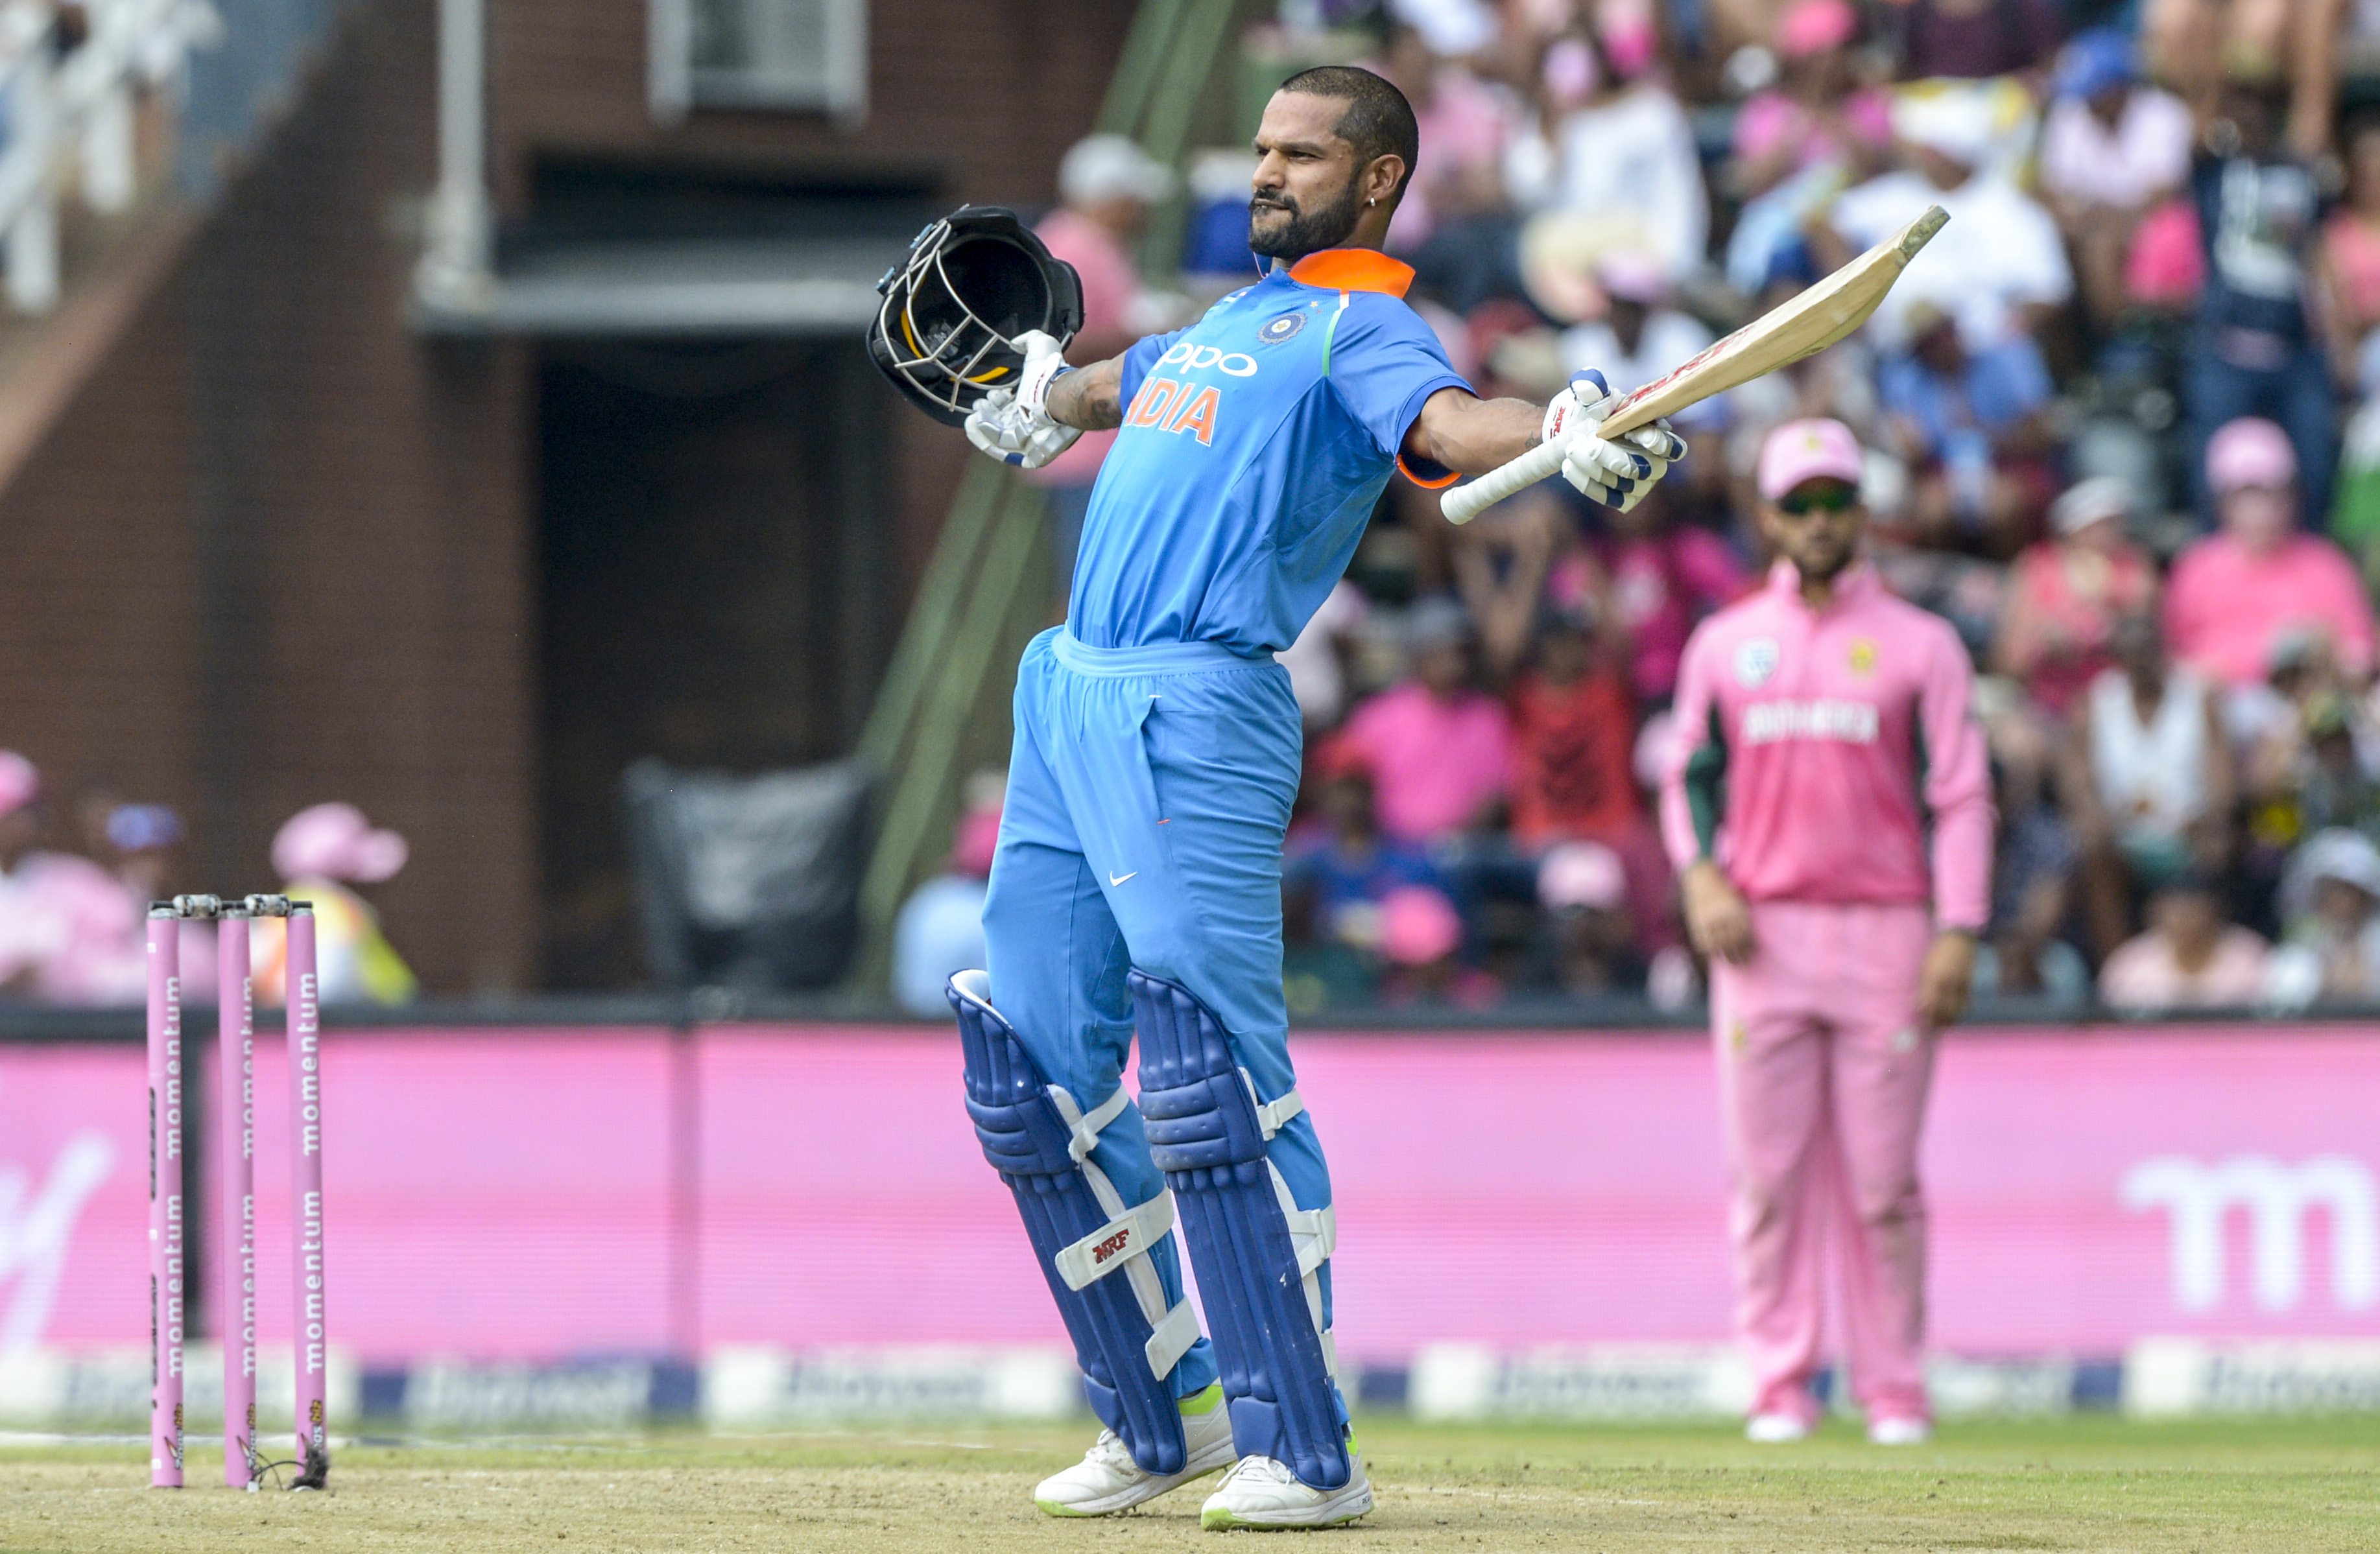 India vs South Africa | India win first T20I to take 1-0 lead